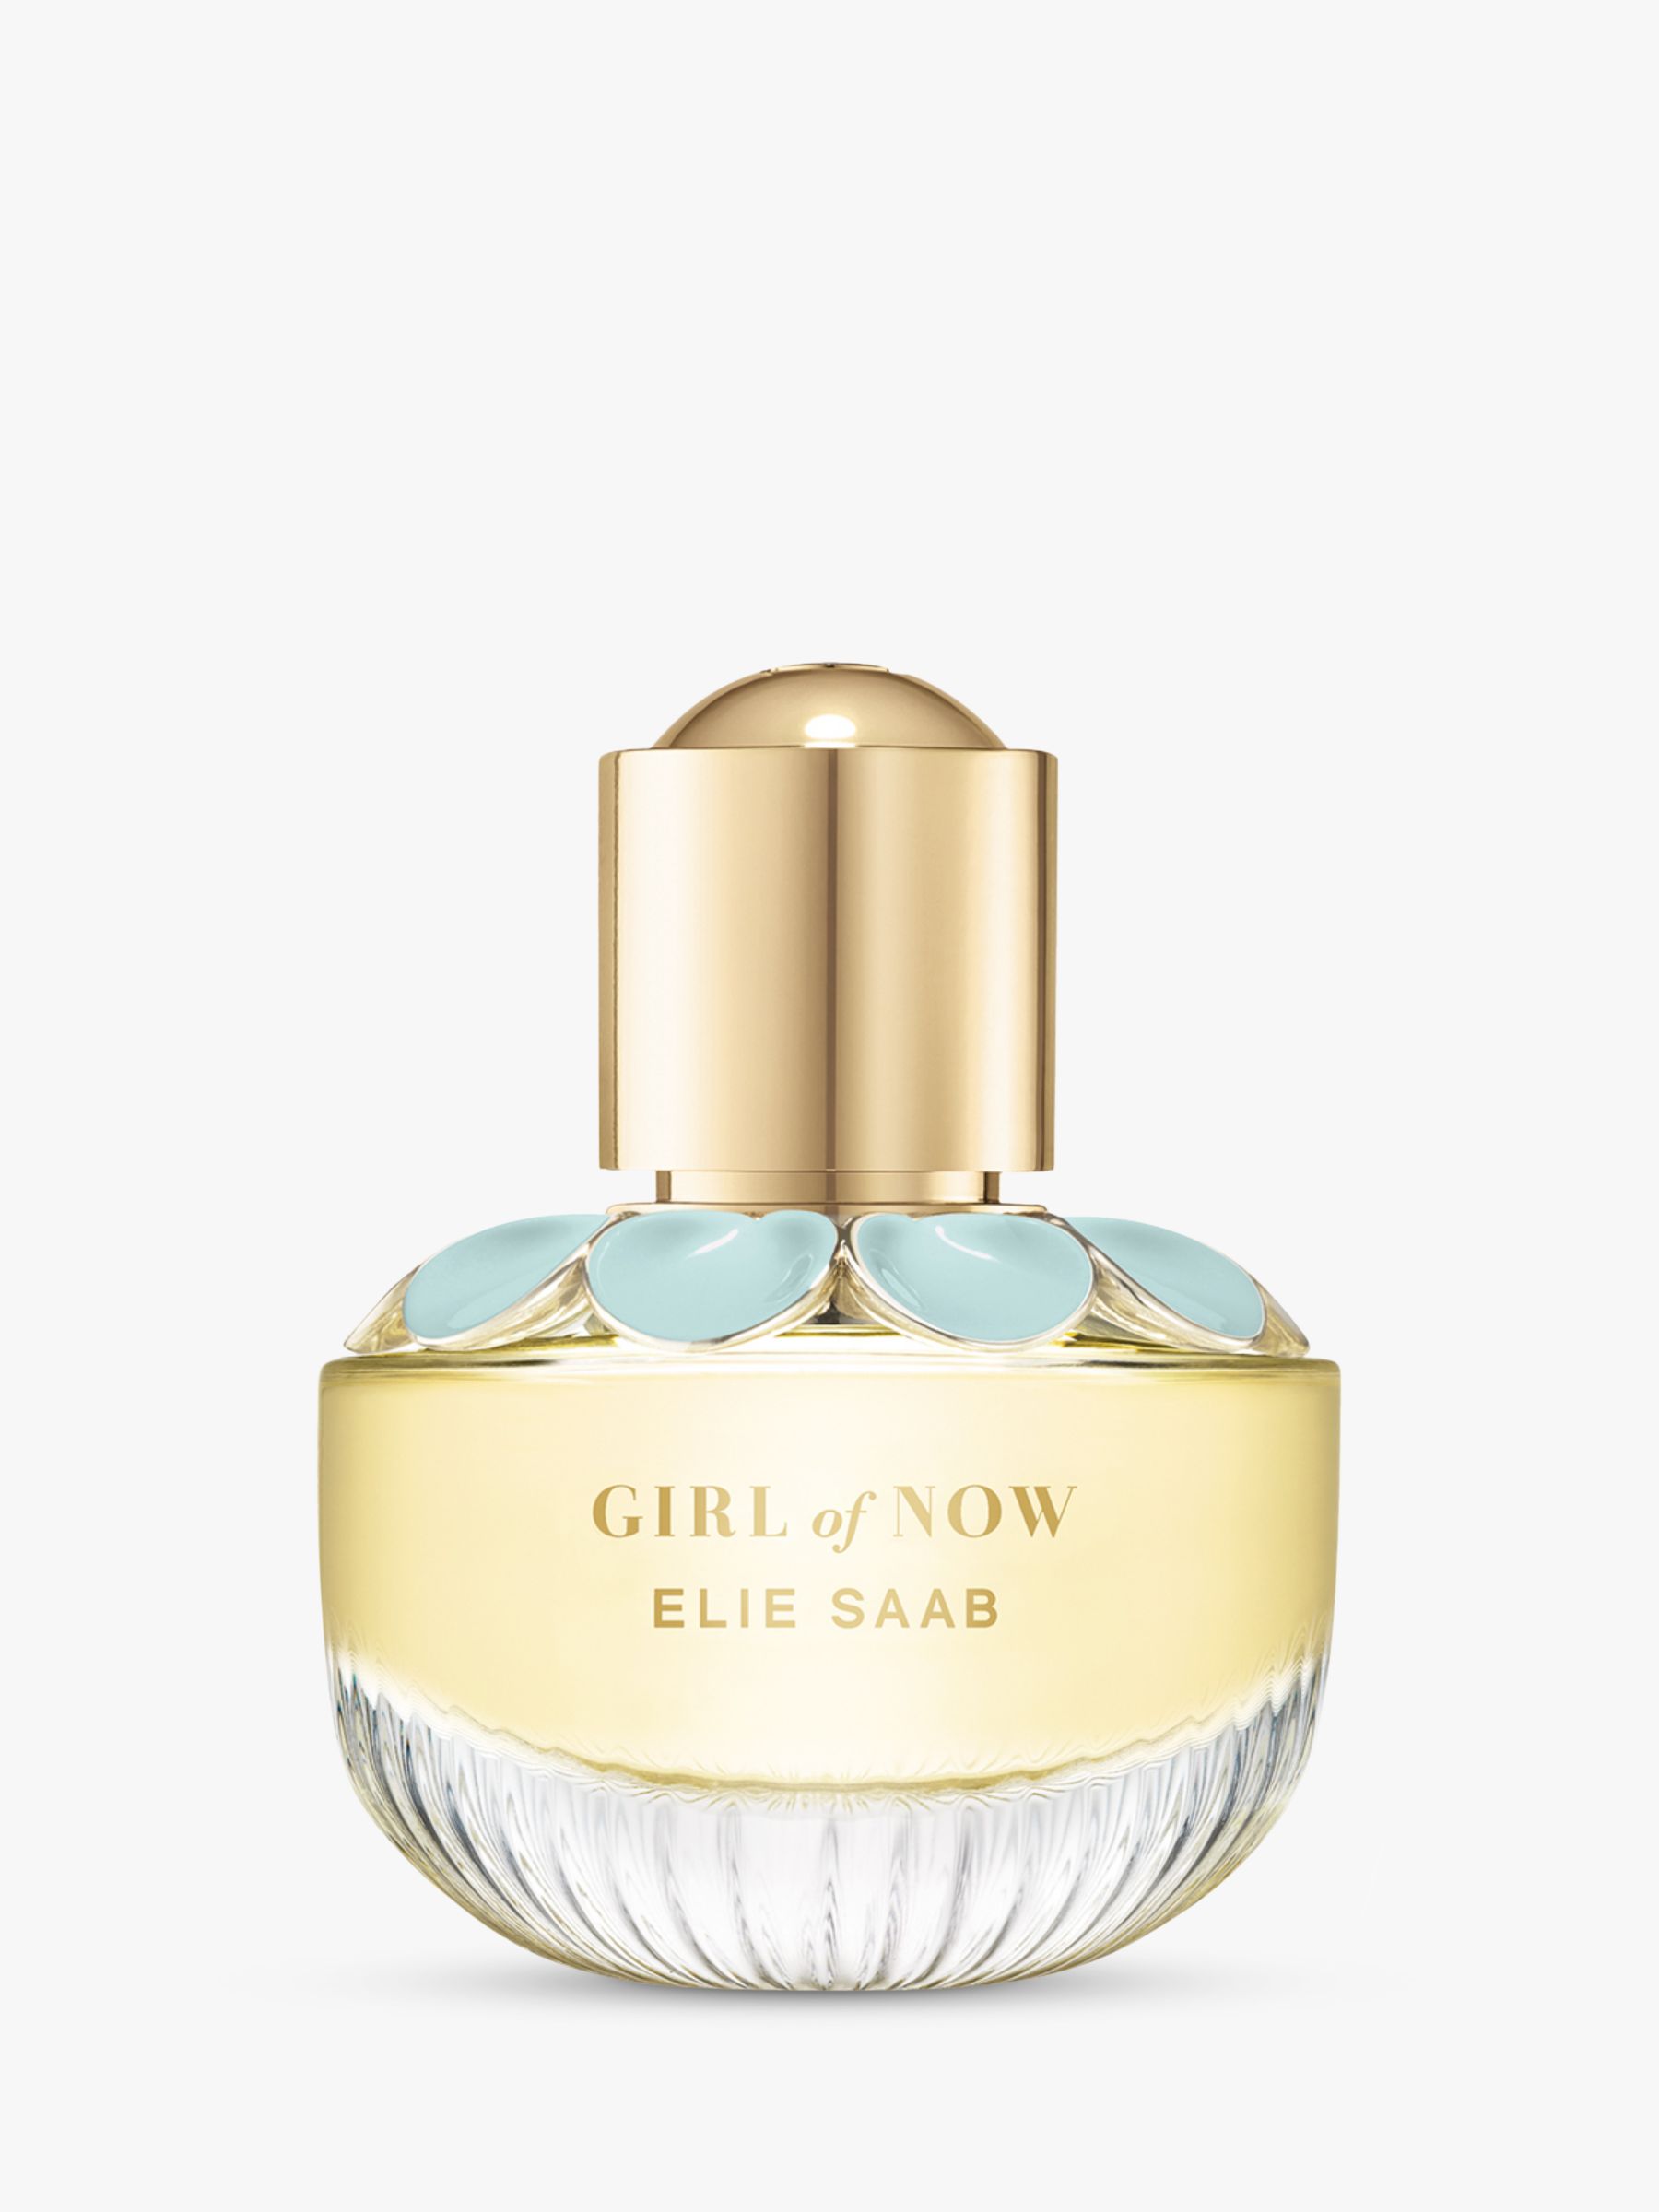 Girl Of Now Lovely Elie Saab Perfume A New Fragrance For Women 2022 ...